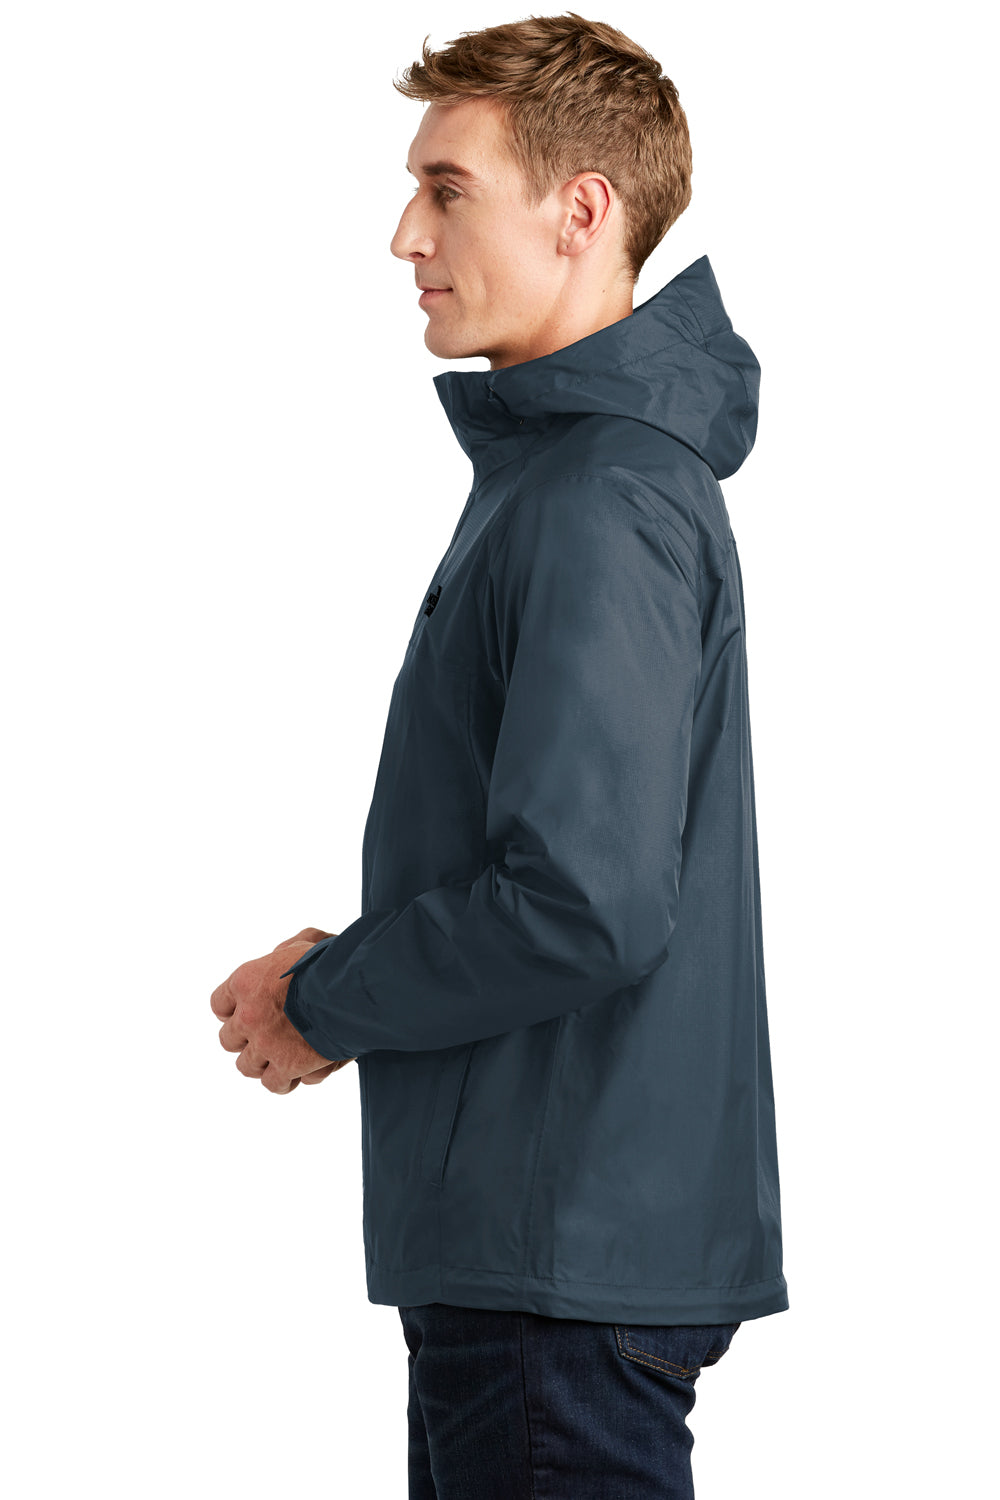 The North Face NF0A3LH4 Mens DryVent Waterproof Full Zip Hooded Jacket Shady Blue Side